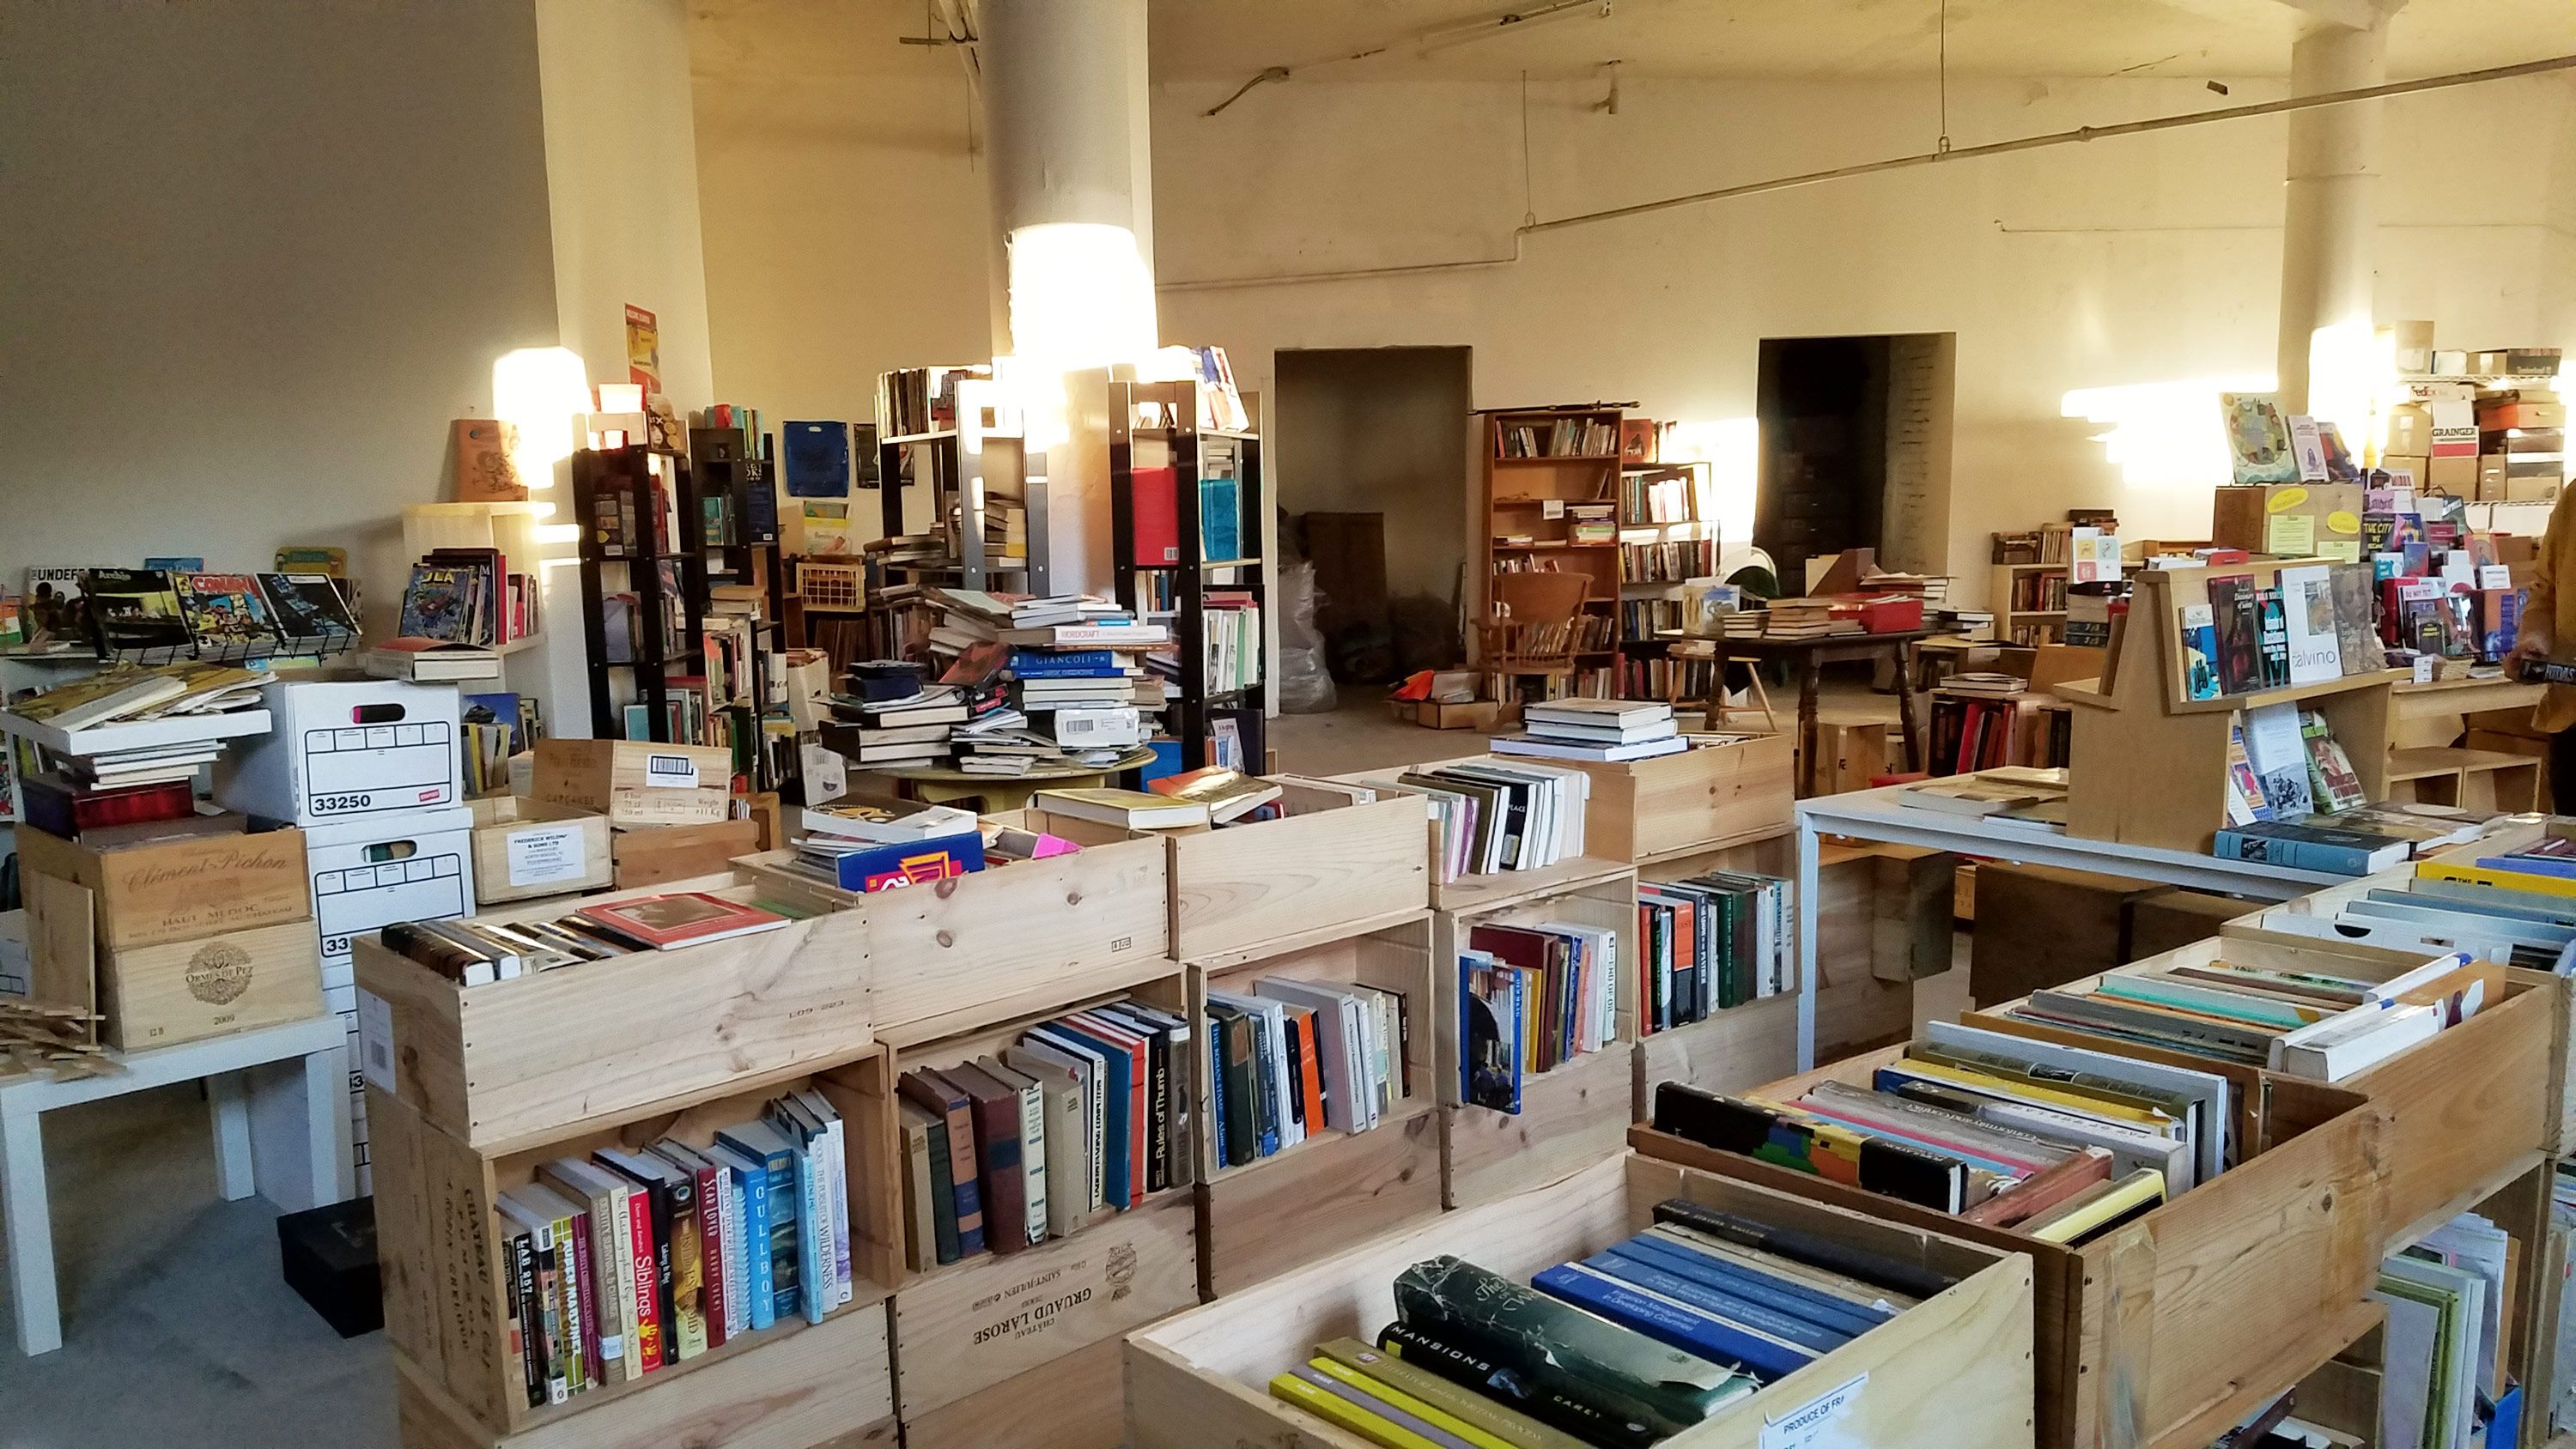 Looking for your next good read? A pop-up bookstore is coming to